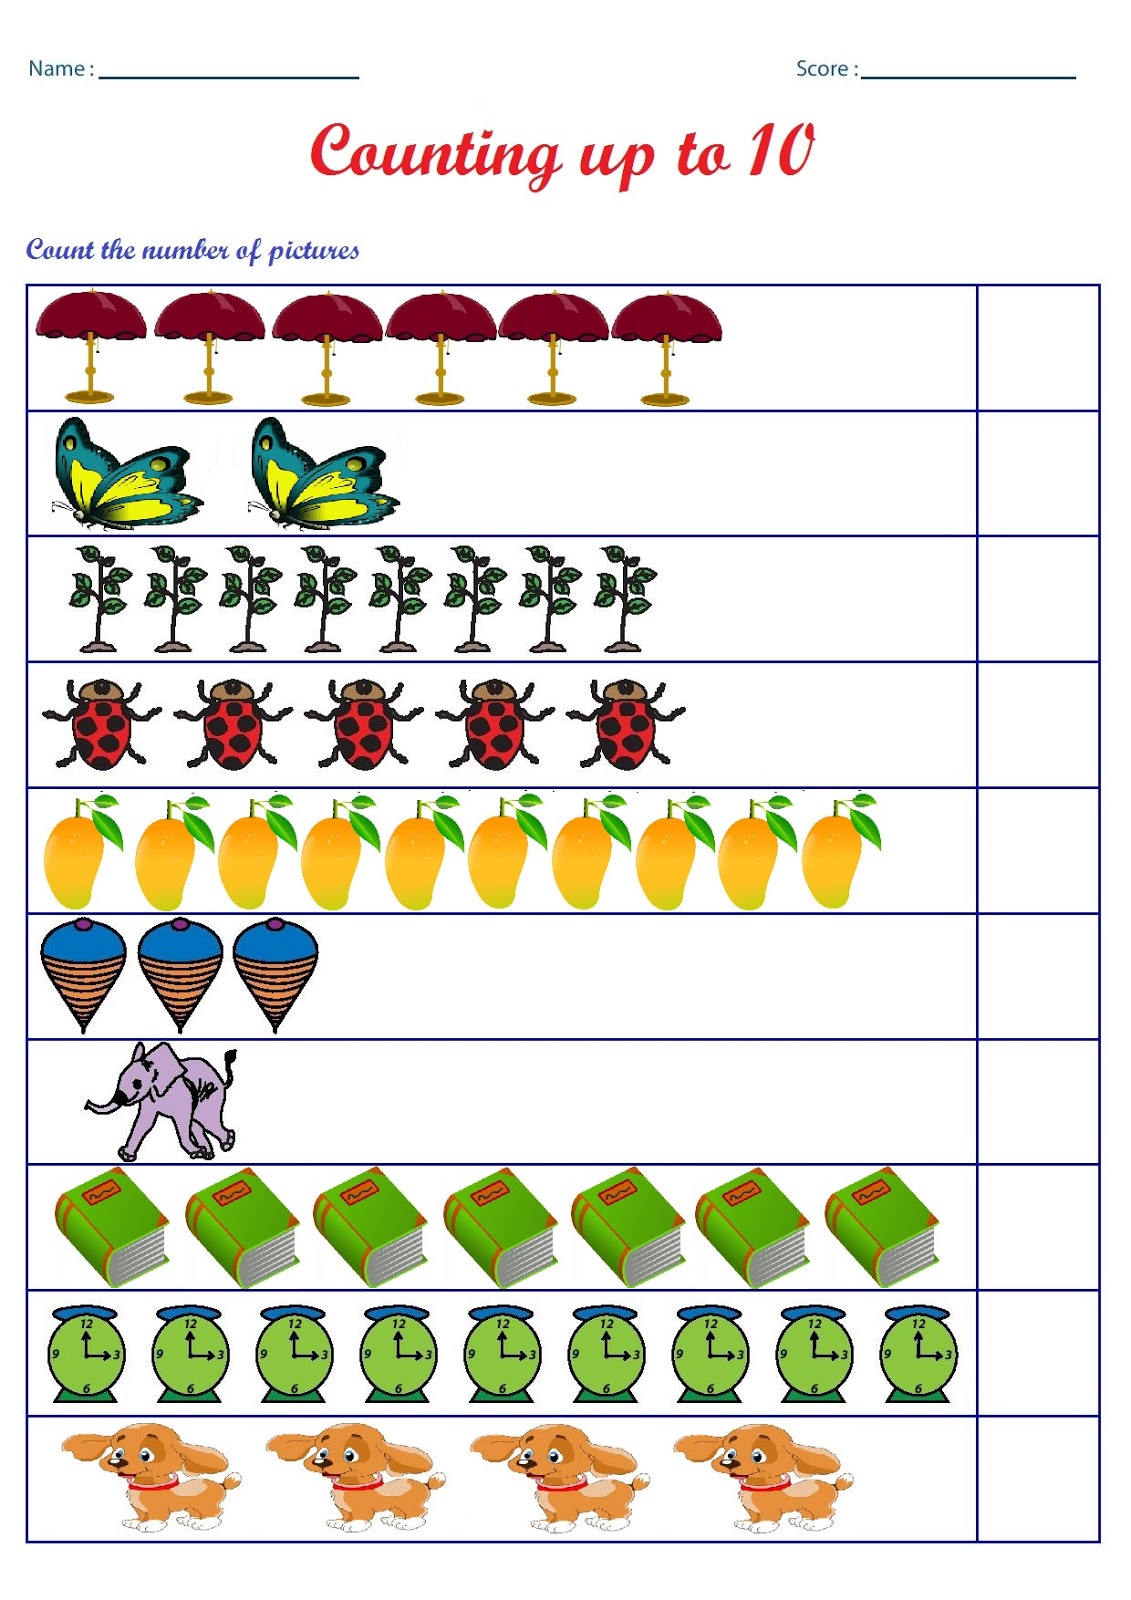 Kindergarten Worksheets Counting Worksheets Count The Number Of Pictures up To 10 